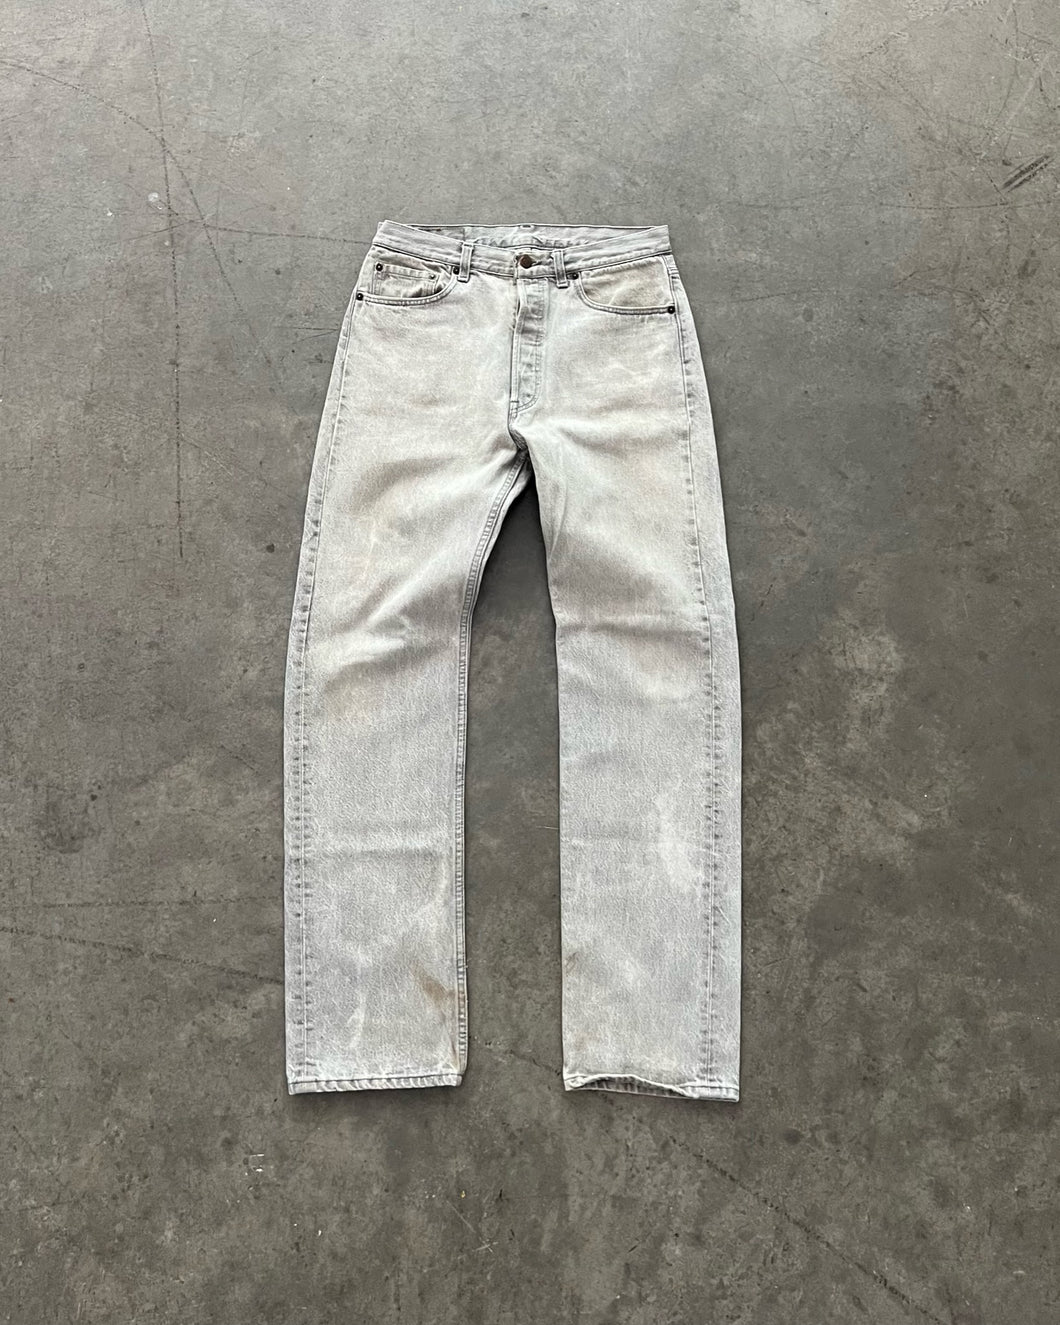 LEVI’S 501 FADED CEMENT GREY JEANS - 1990S